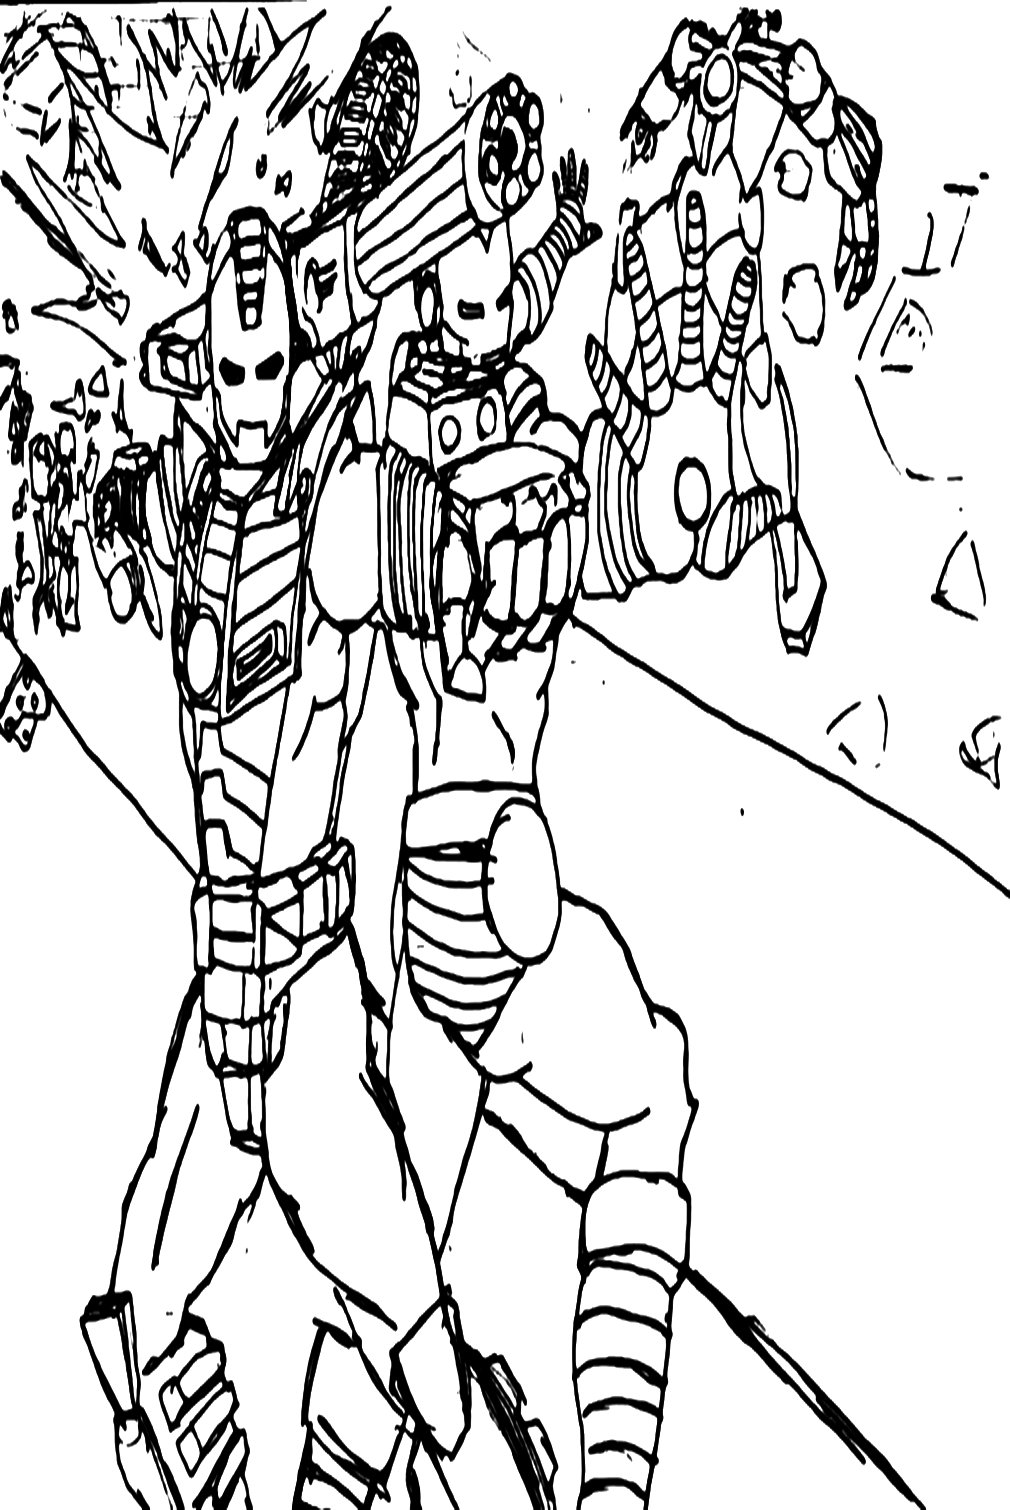 Iron Man Attacks The Enemy By Shooting Repulsor Rays Coloring Pages